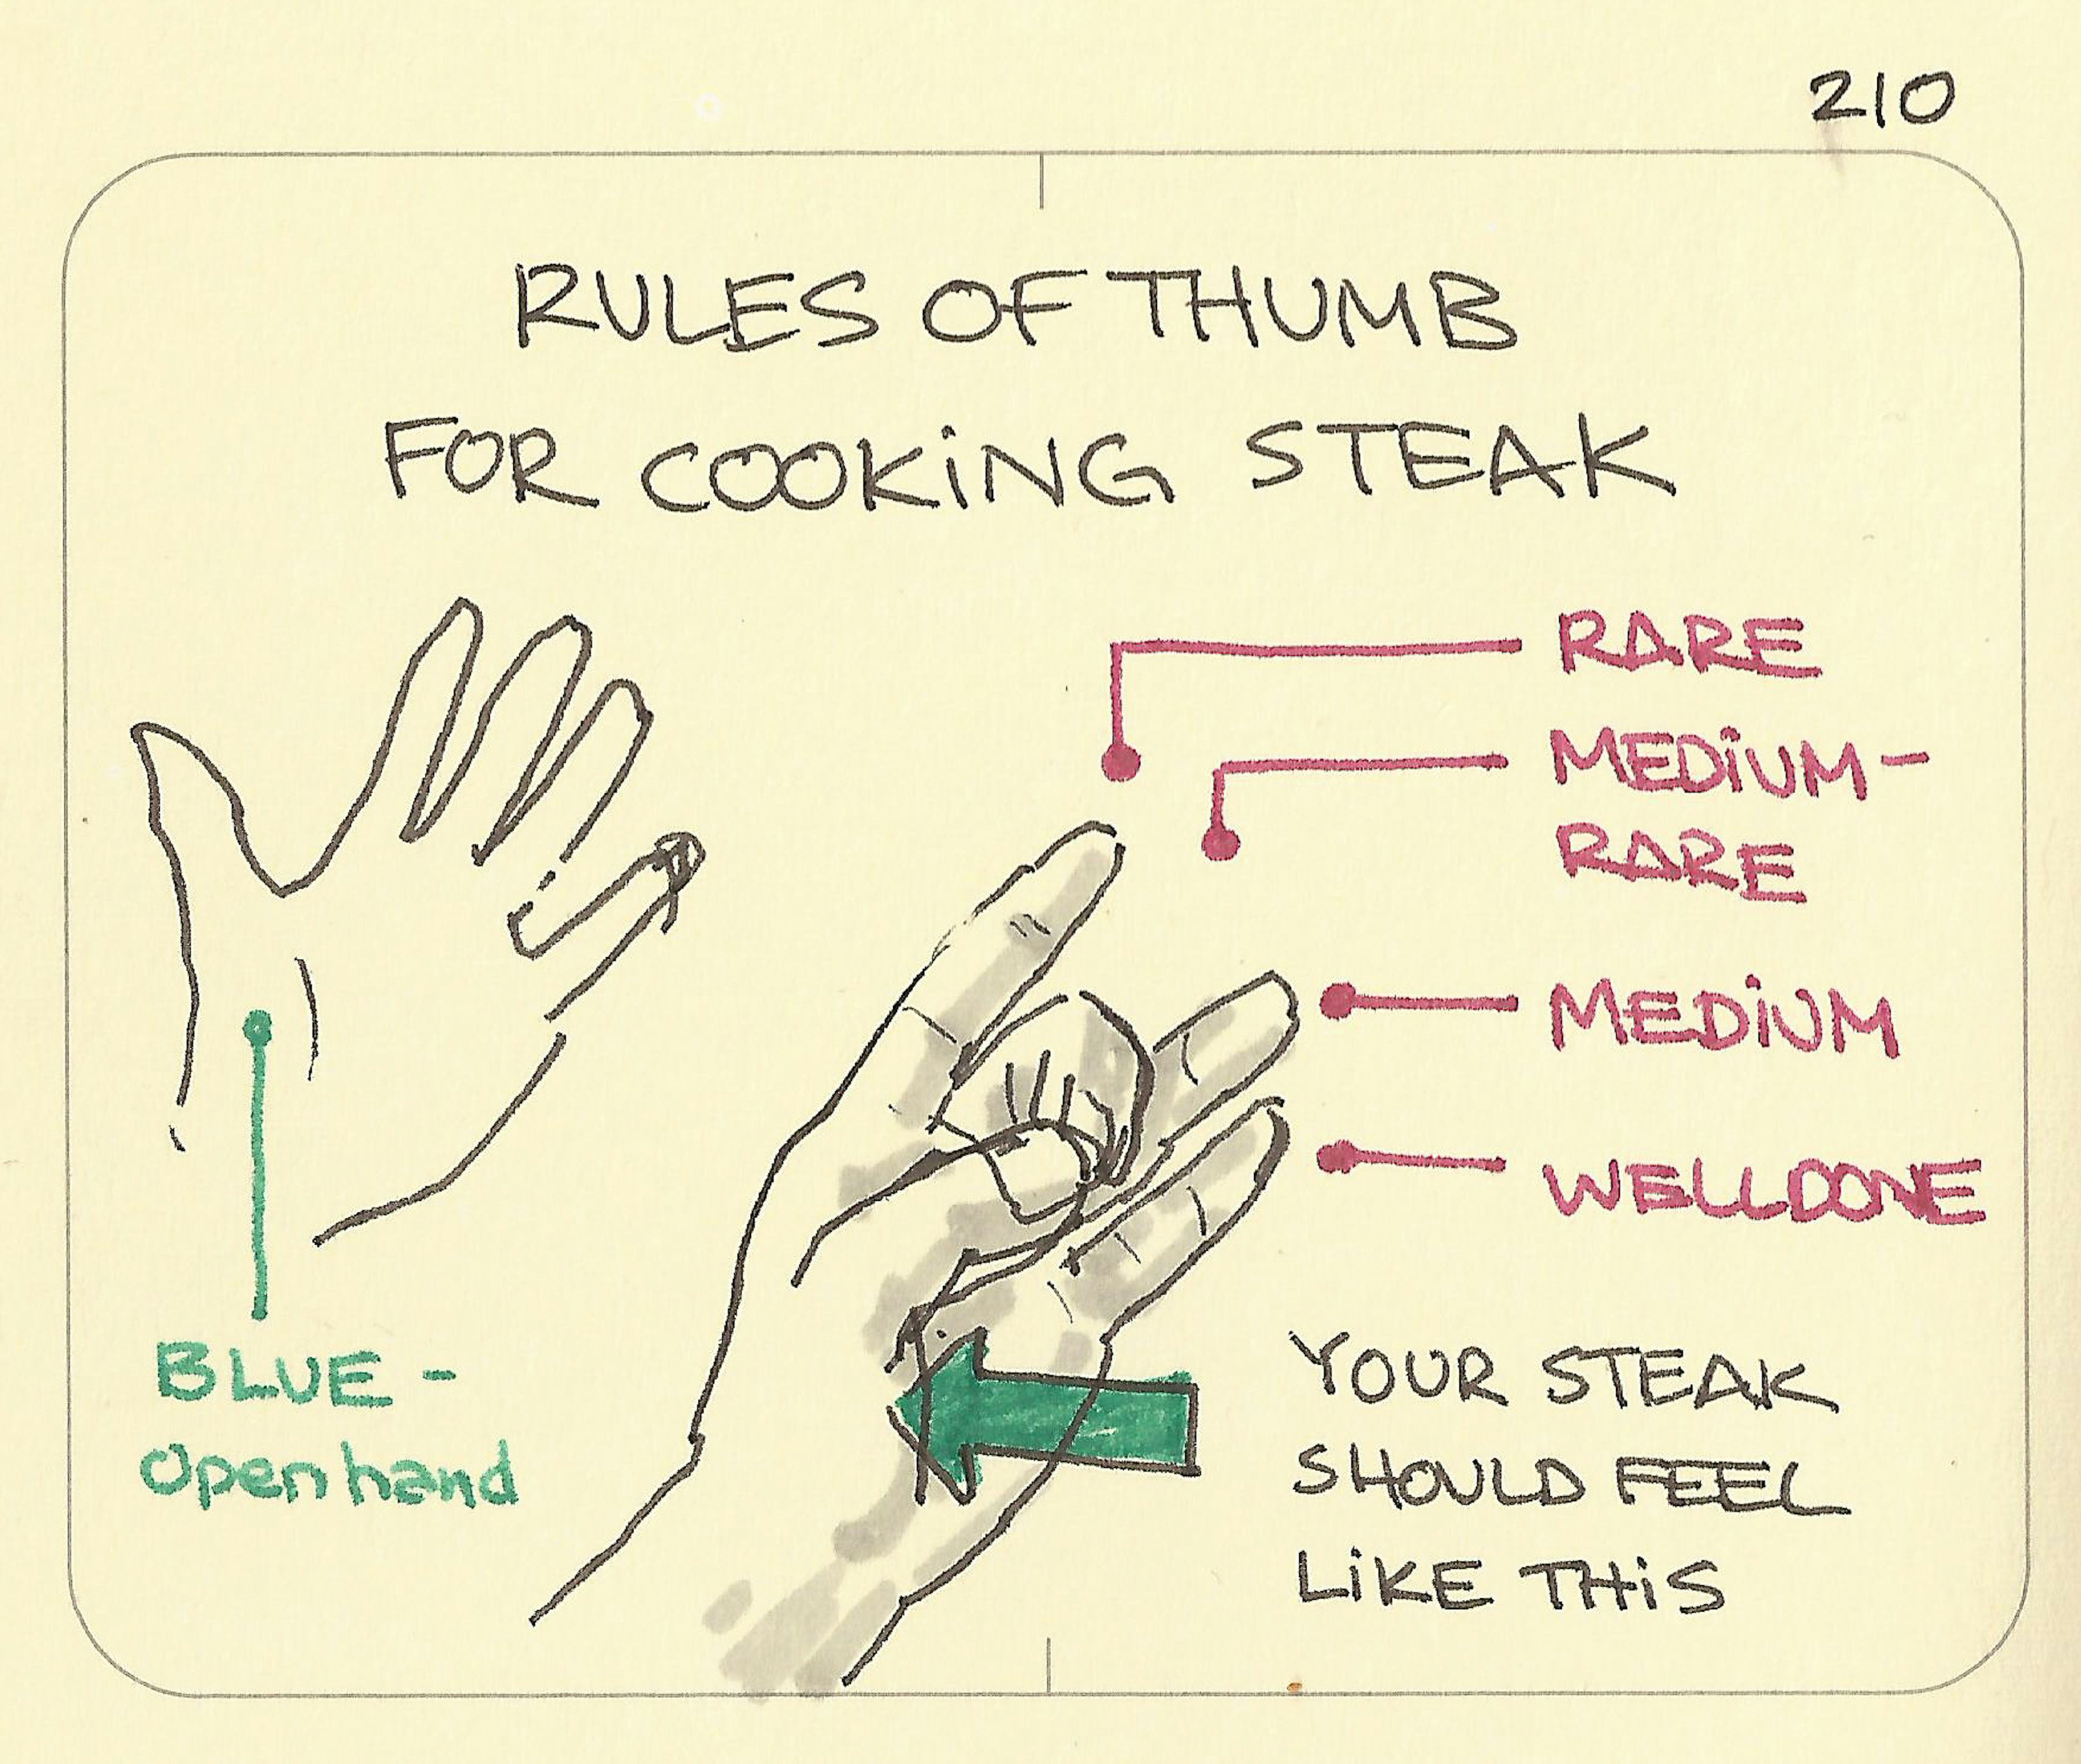 Rules of thumb for cooking steak - Sketchplanations